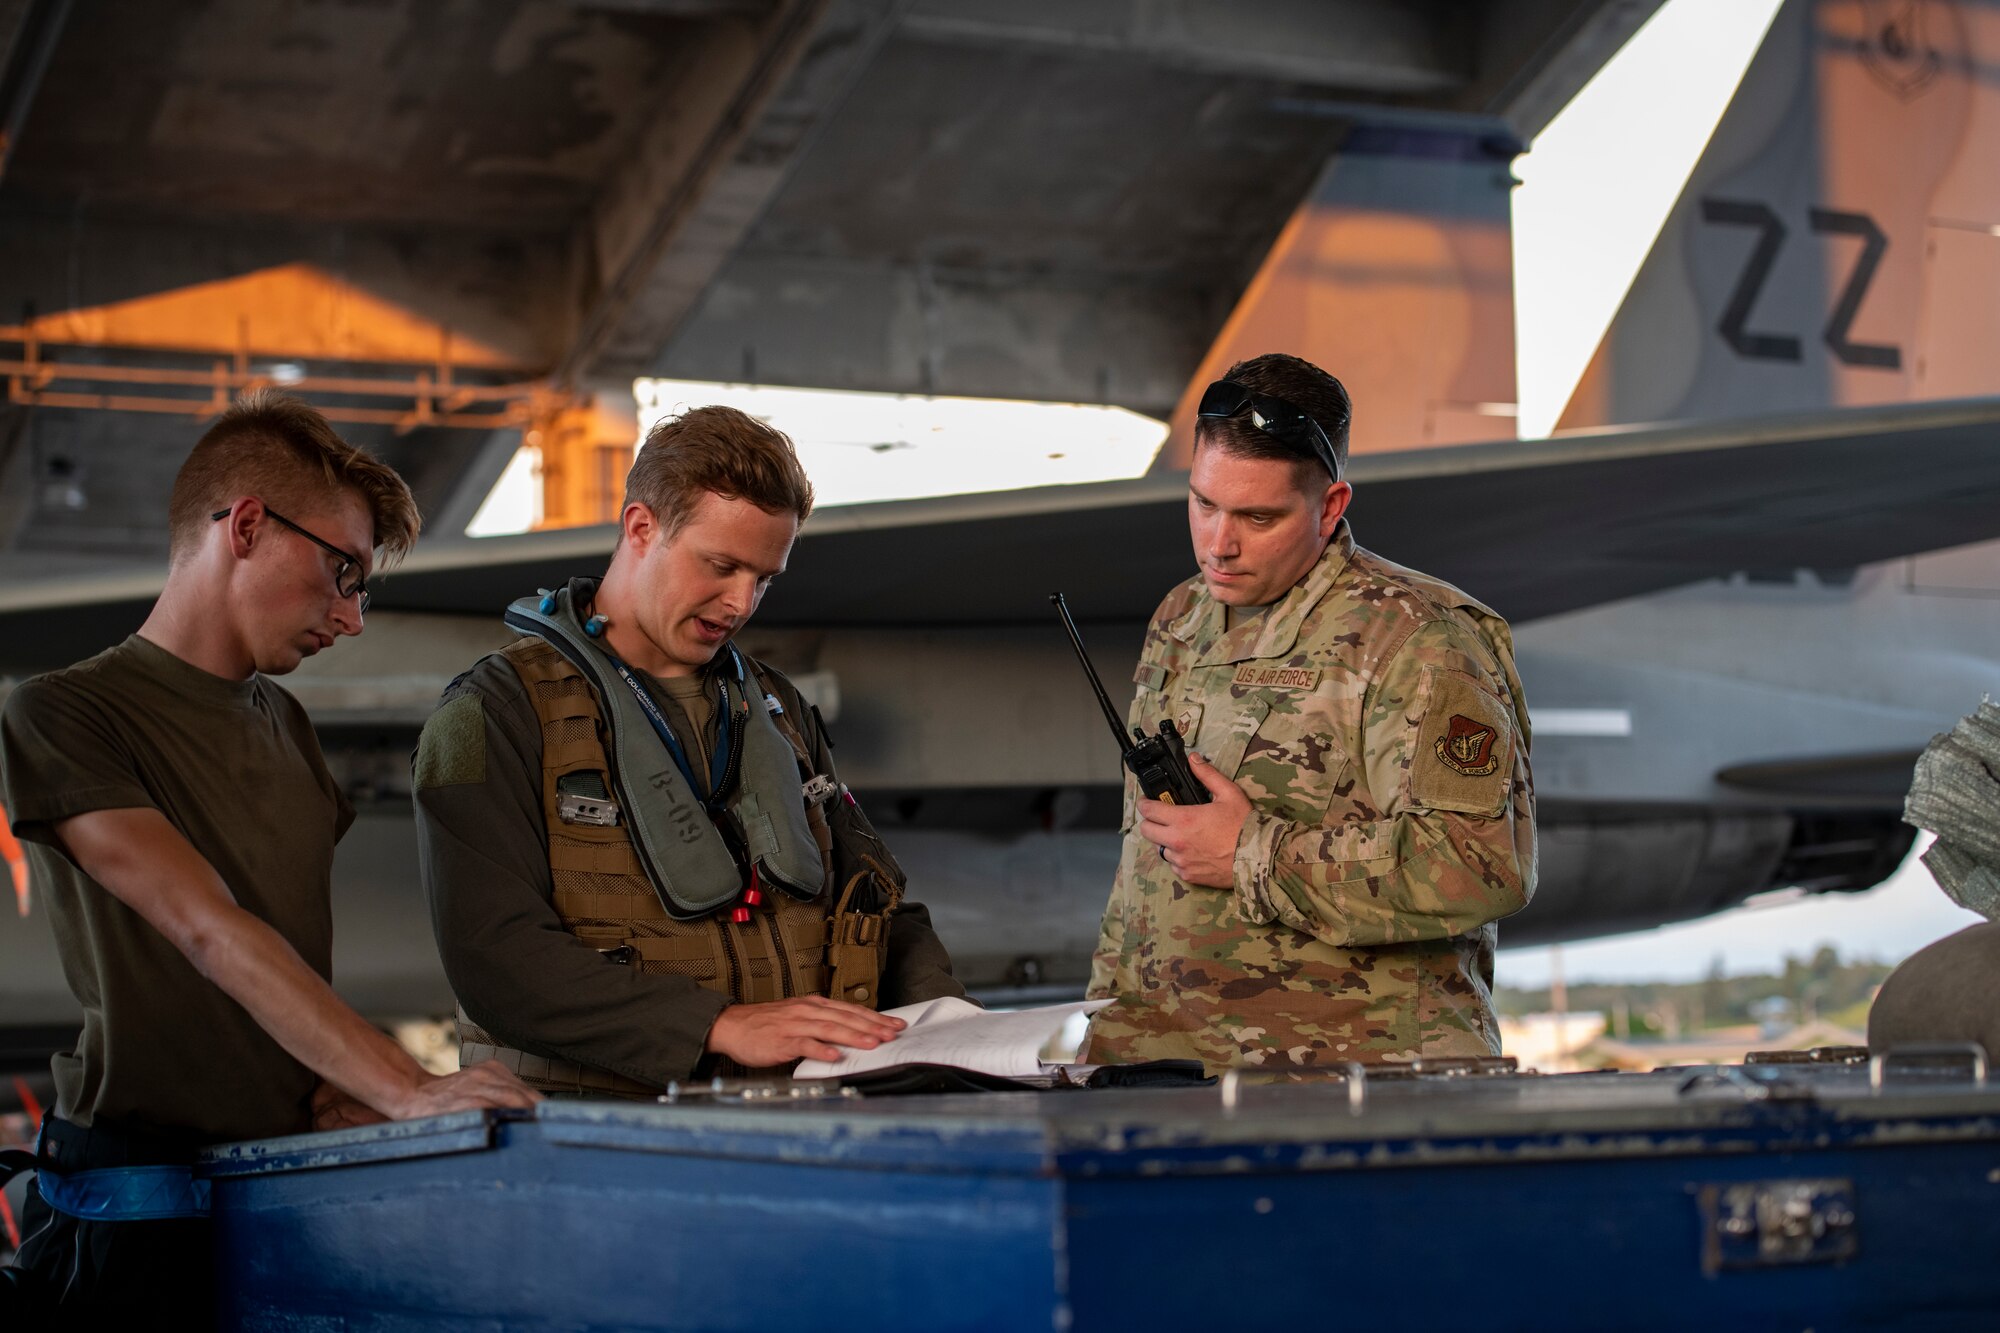 A pilot assigned to the 44th Fighter Squadron and two maintainers from the 18th Aircraft Maintenance Squadron review an F-15C Eagle maintenance log during pre-flight checks prior to a night flying training mission at Kadena Air Base, Japan, Sept. 22, 2021. Kadena Airmen regularly train to maintain their capability to provide unrivaled air power in support of U.S. Indo-Pacific Command objectives. (U.S. Air Force photo by Maj. Raymond Geoffroy)